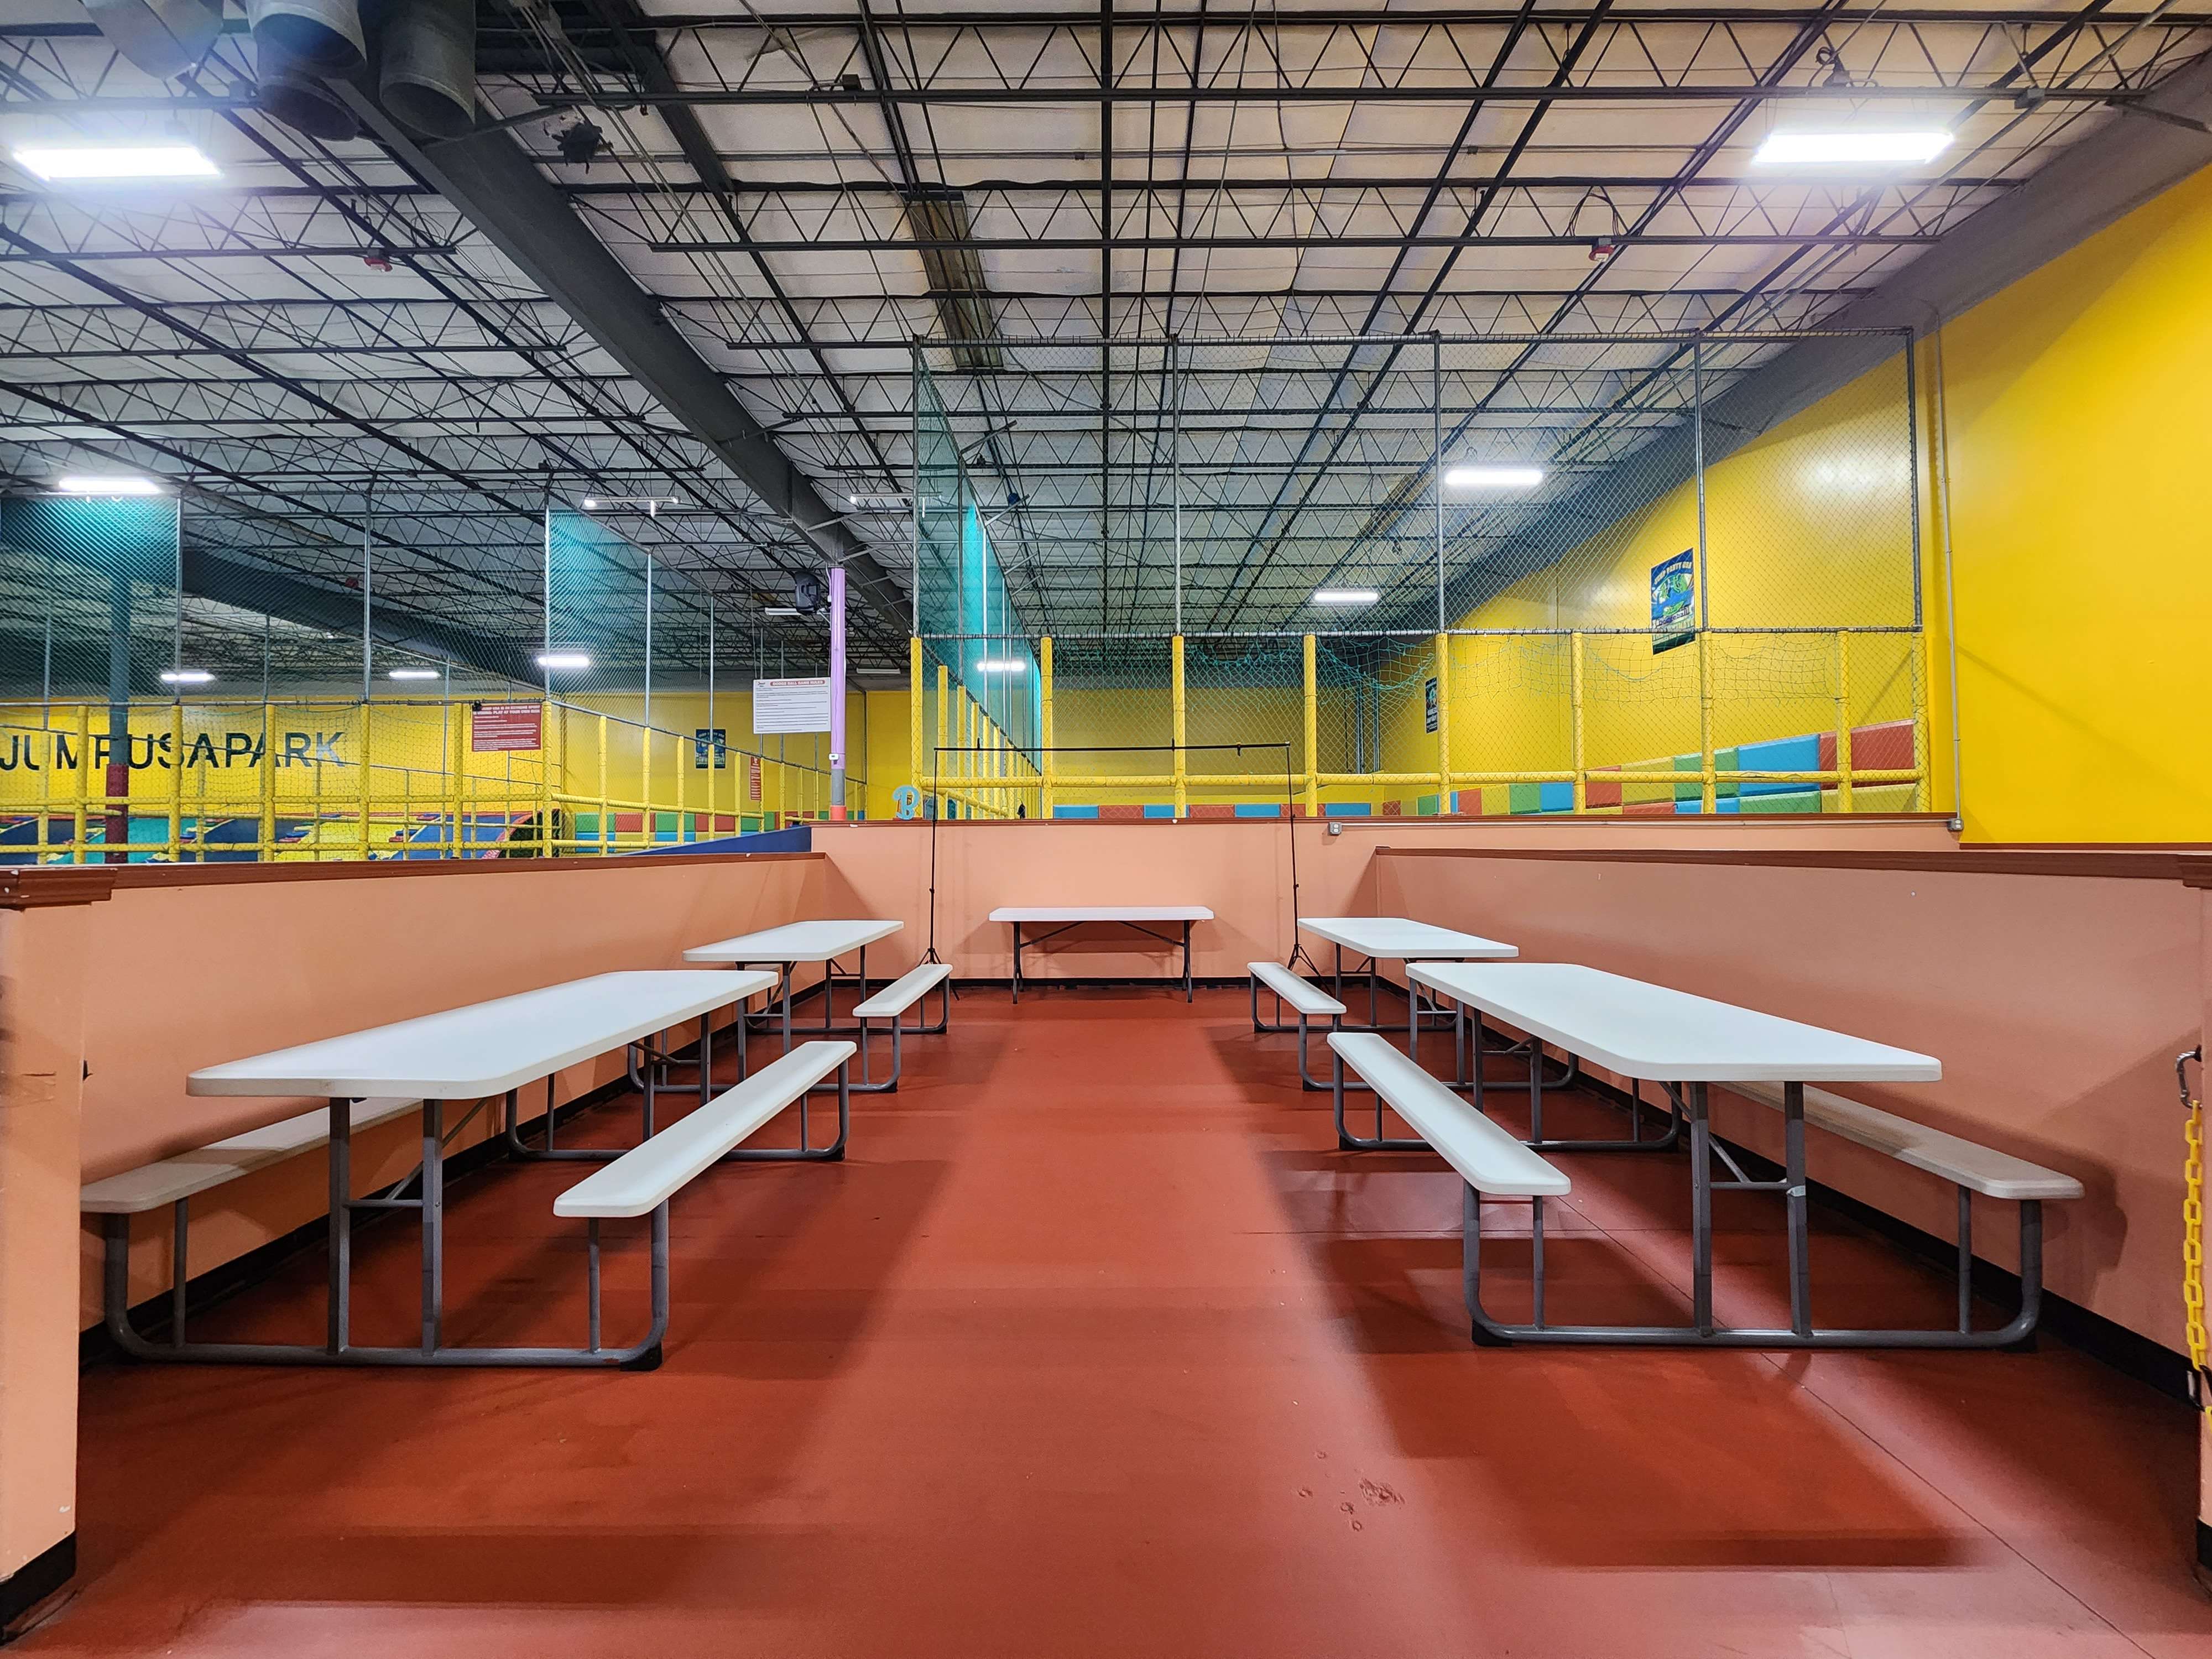 Jump Party USA has 6 open view party rooms with 4 picnic tables and one center table for 30 people